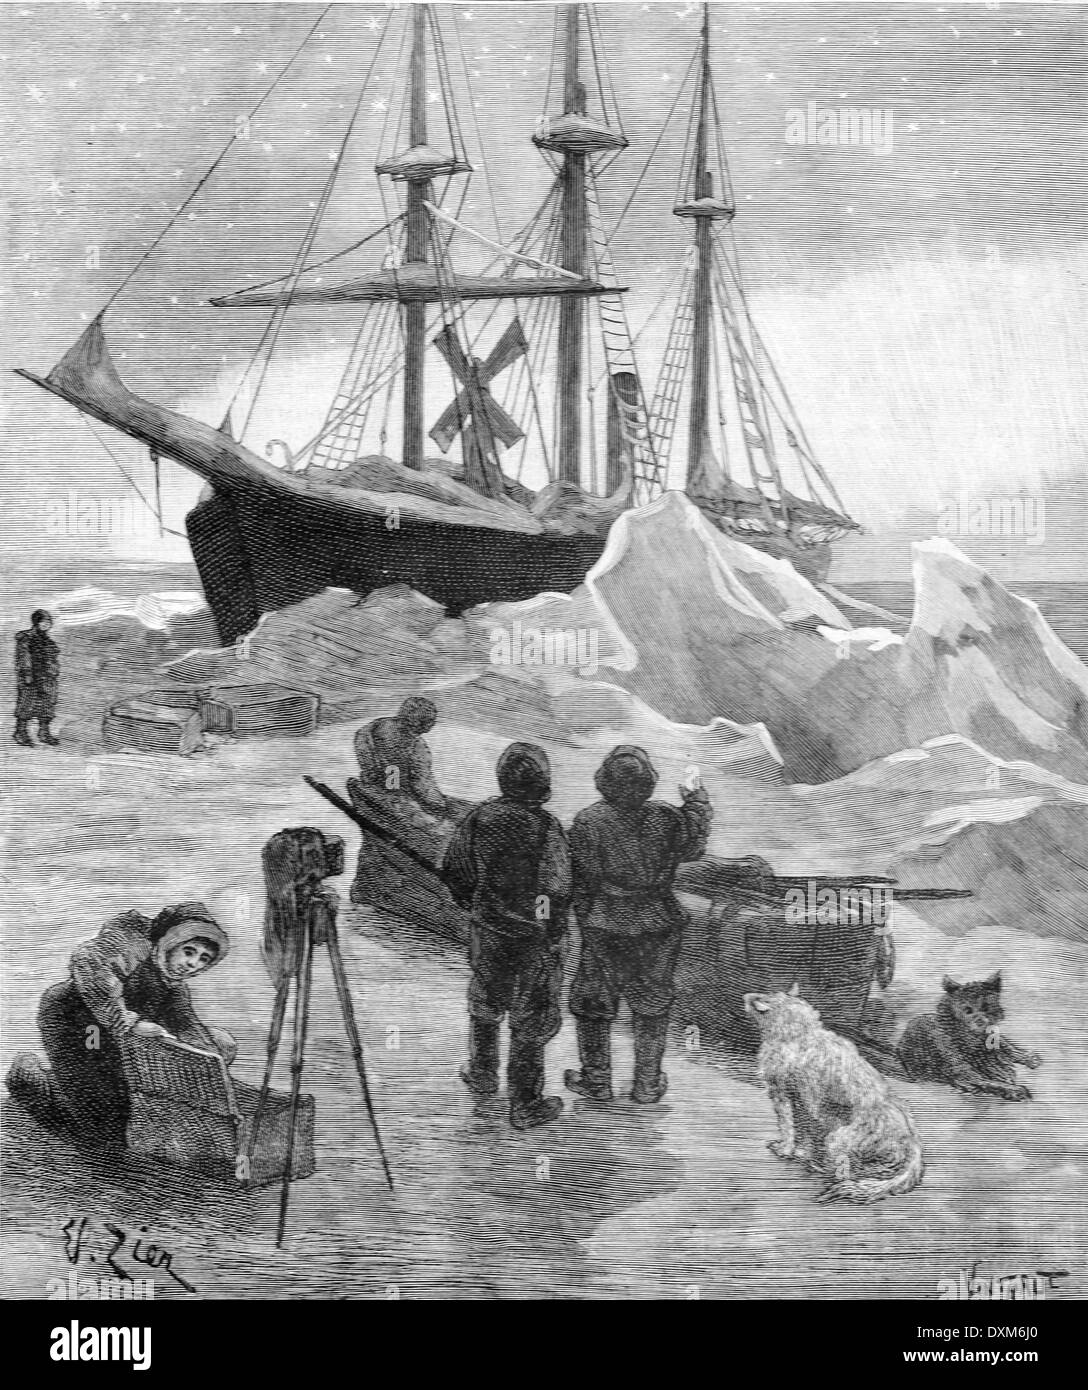 Photographer Photographing the Norwegian Arctic Explorer Fridtjof Nansen during his North Pole Expedition 1893-1896 Illustration 1897 Stock Photo